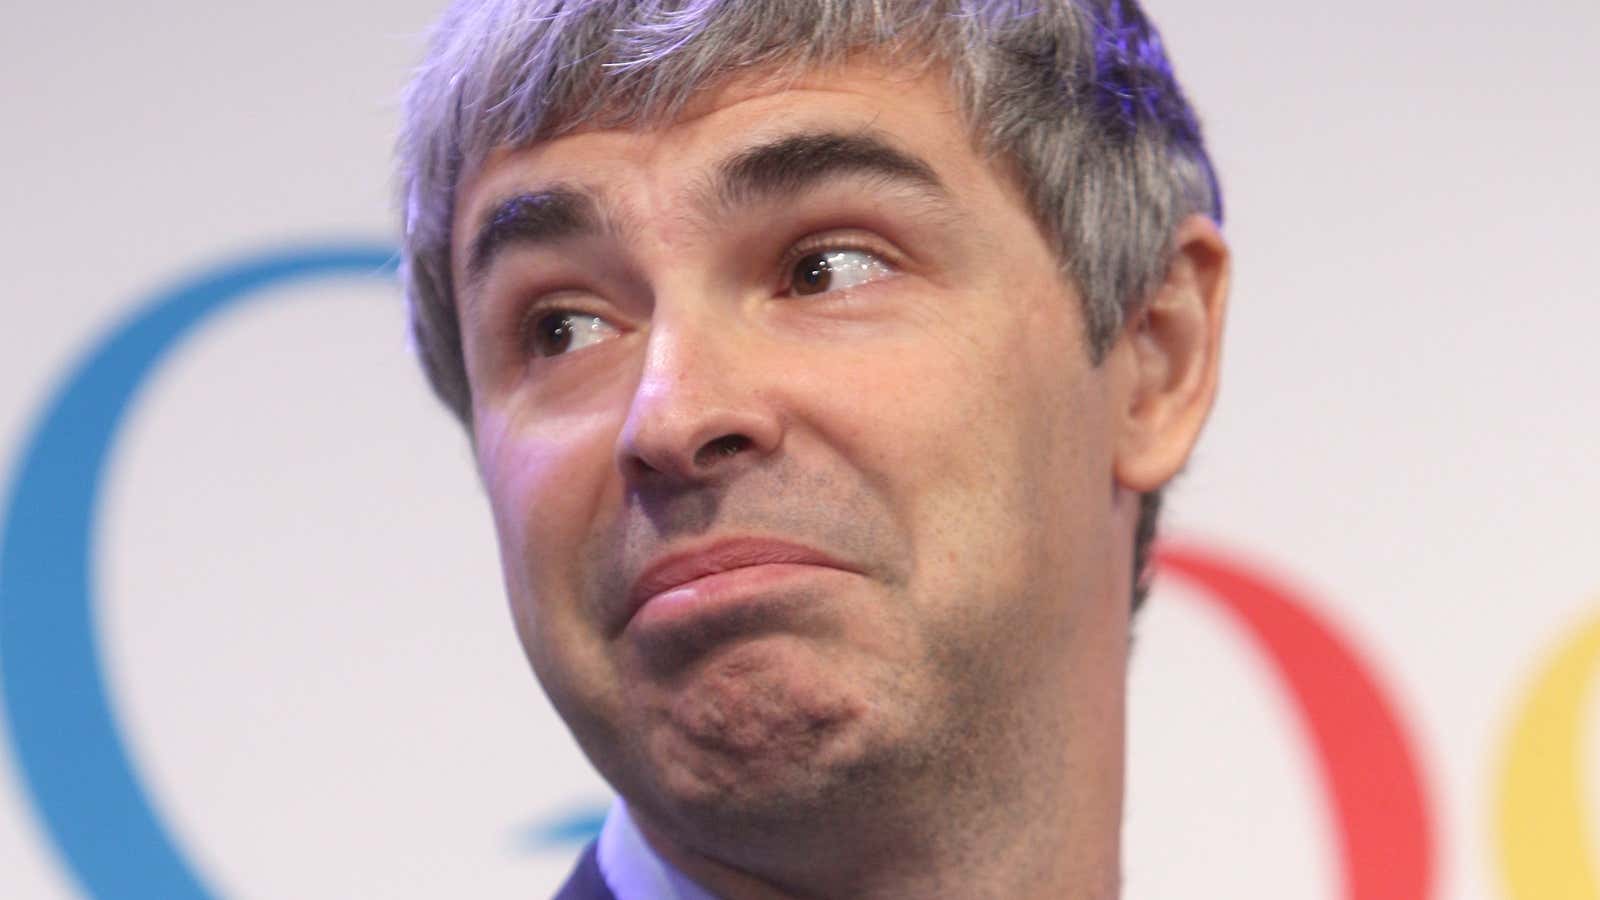 Google CEO Larry Page takes questions from the audience during a news conference at the Google offices in New York, Monday, May 21, 2012. Google’s…